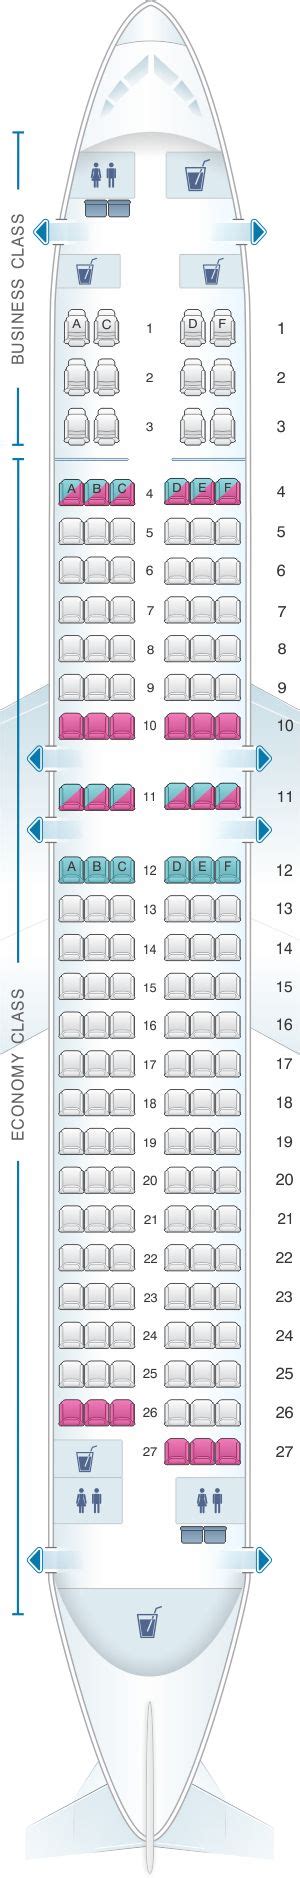 Seat Map Turkish Airlines Airbus A Vietnam Airlines Airline